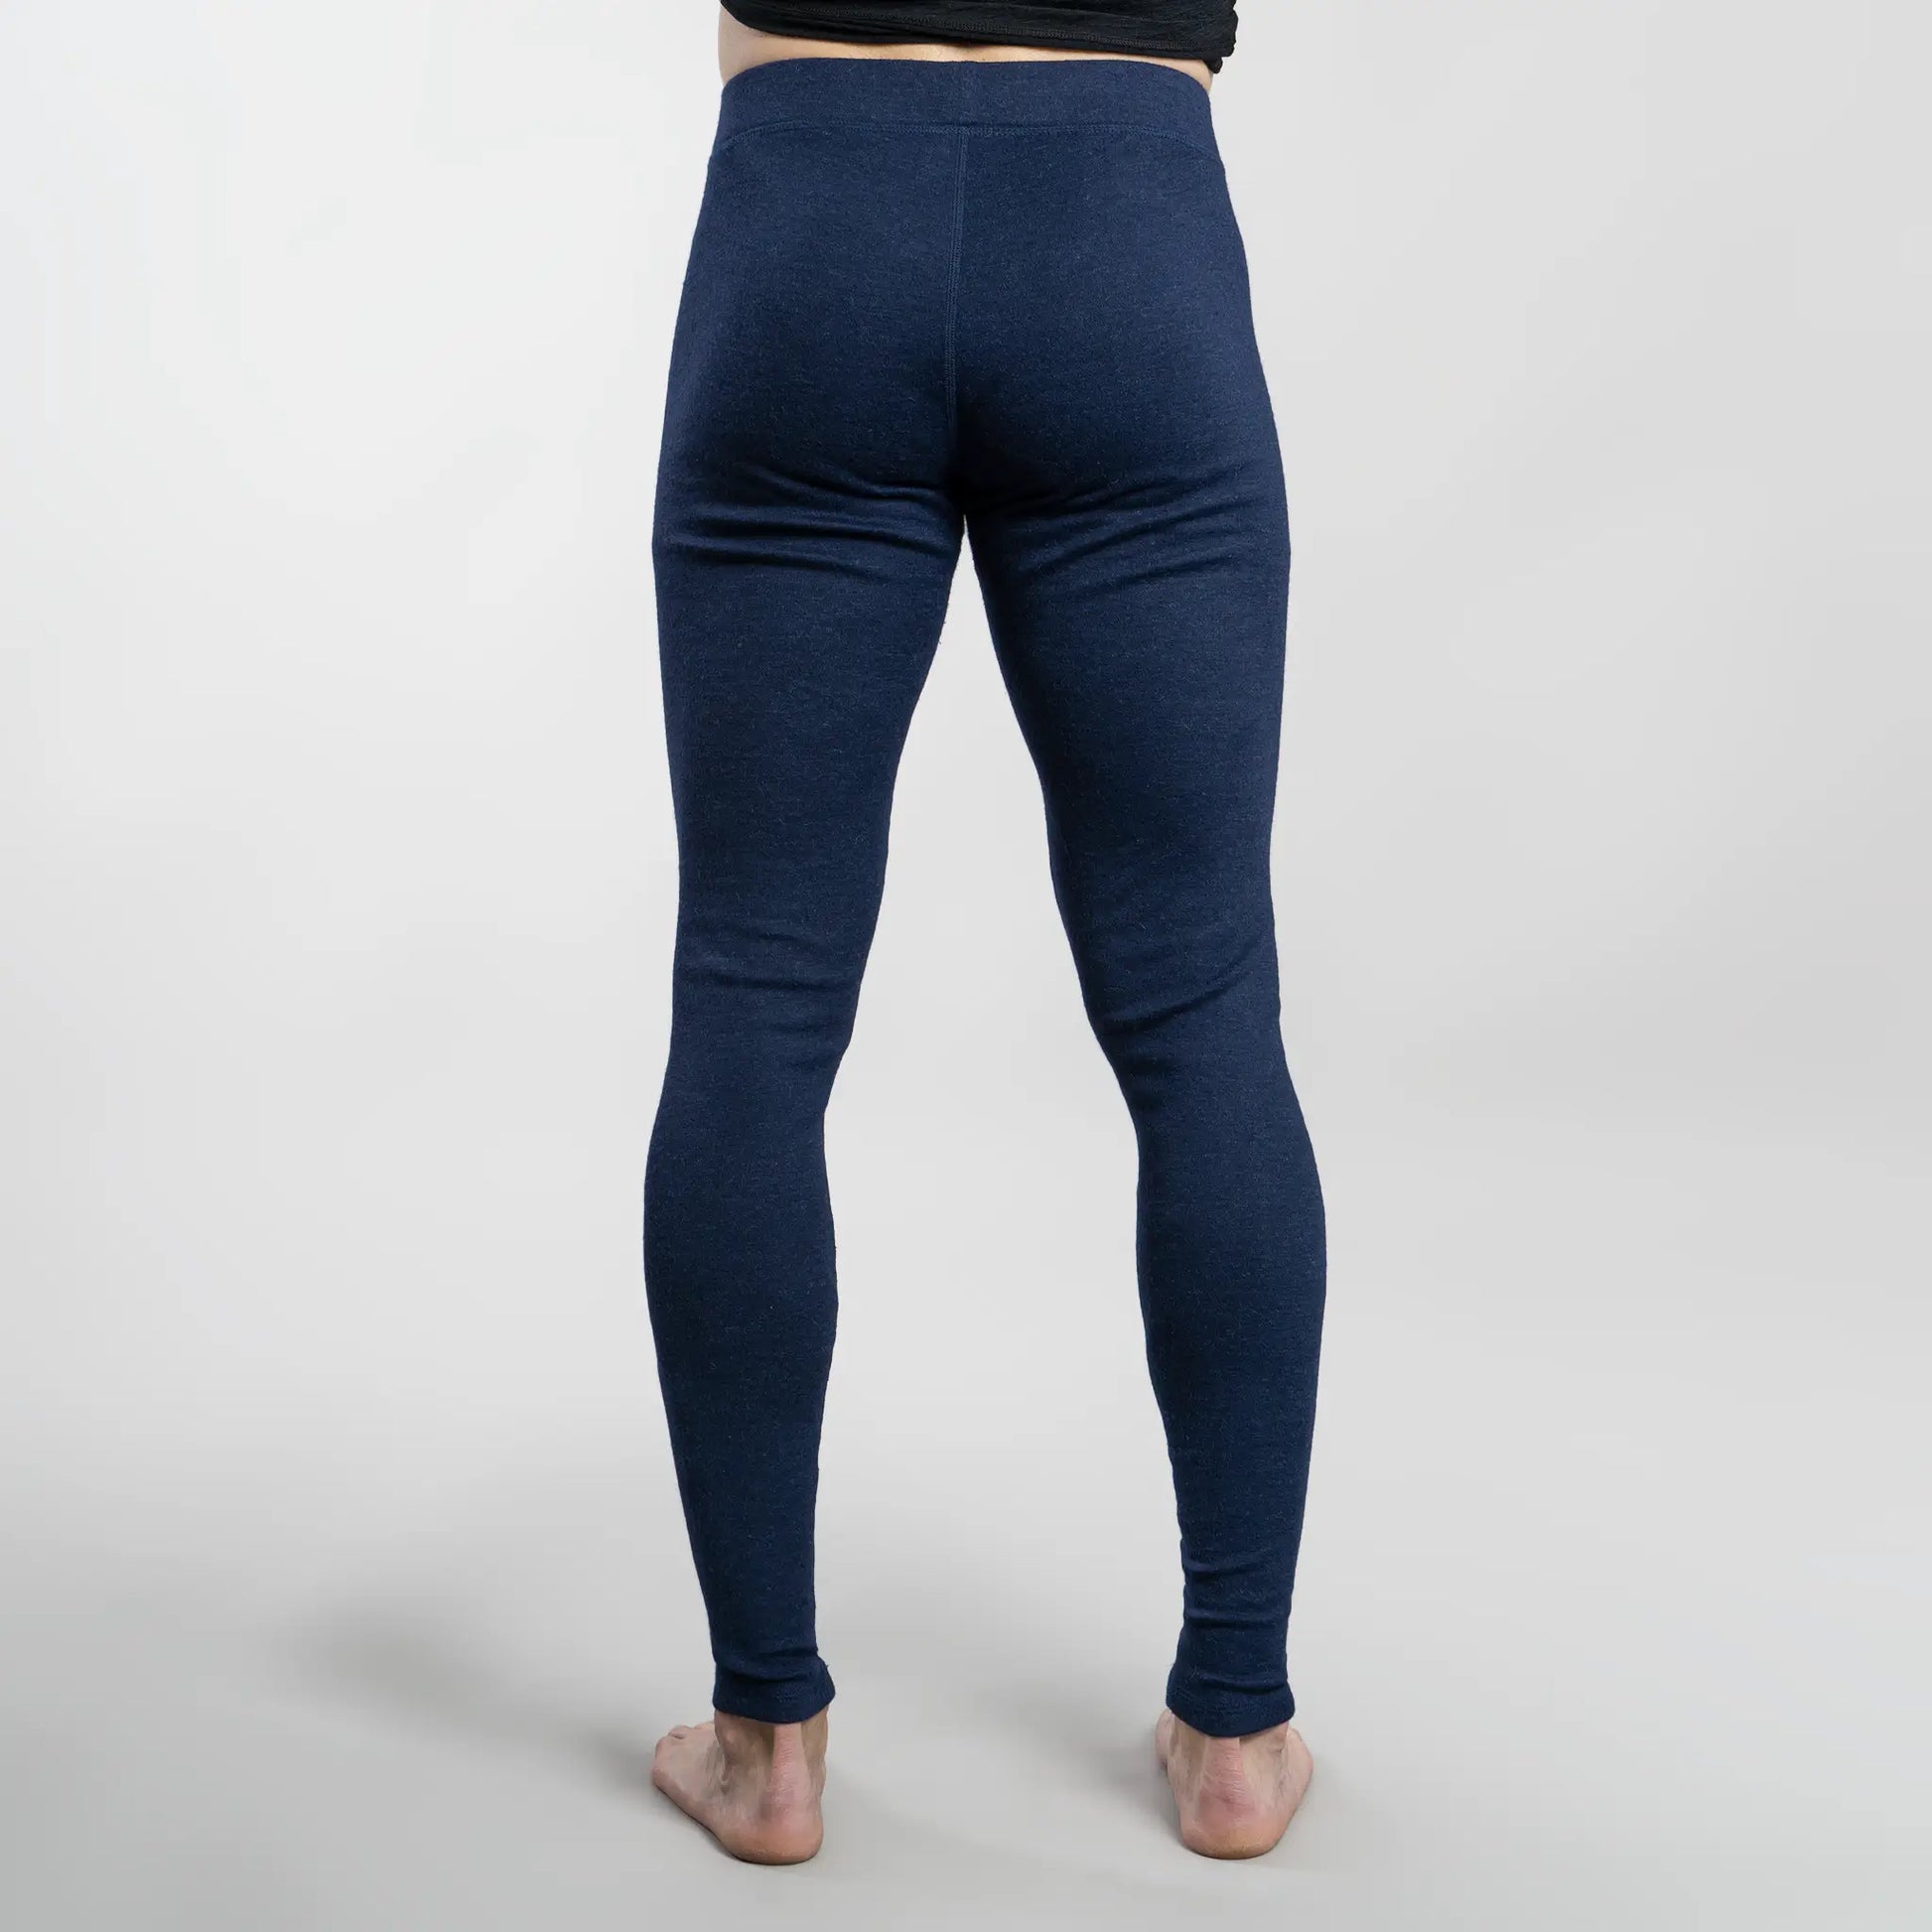 mens any activity leggings lightweight color navy blue